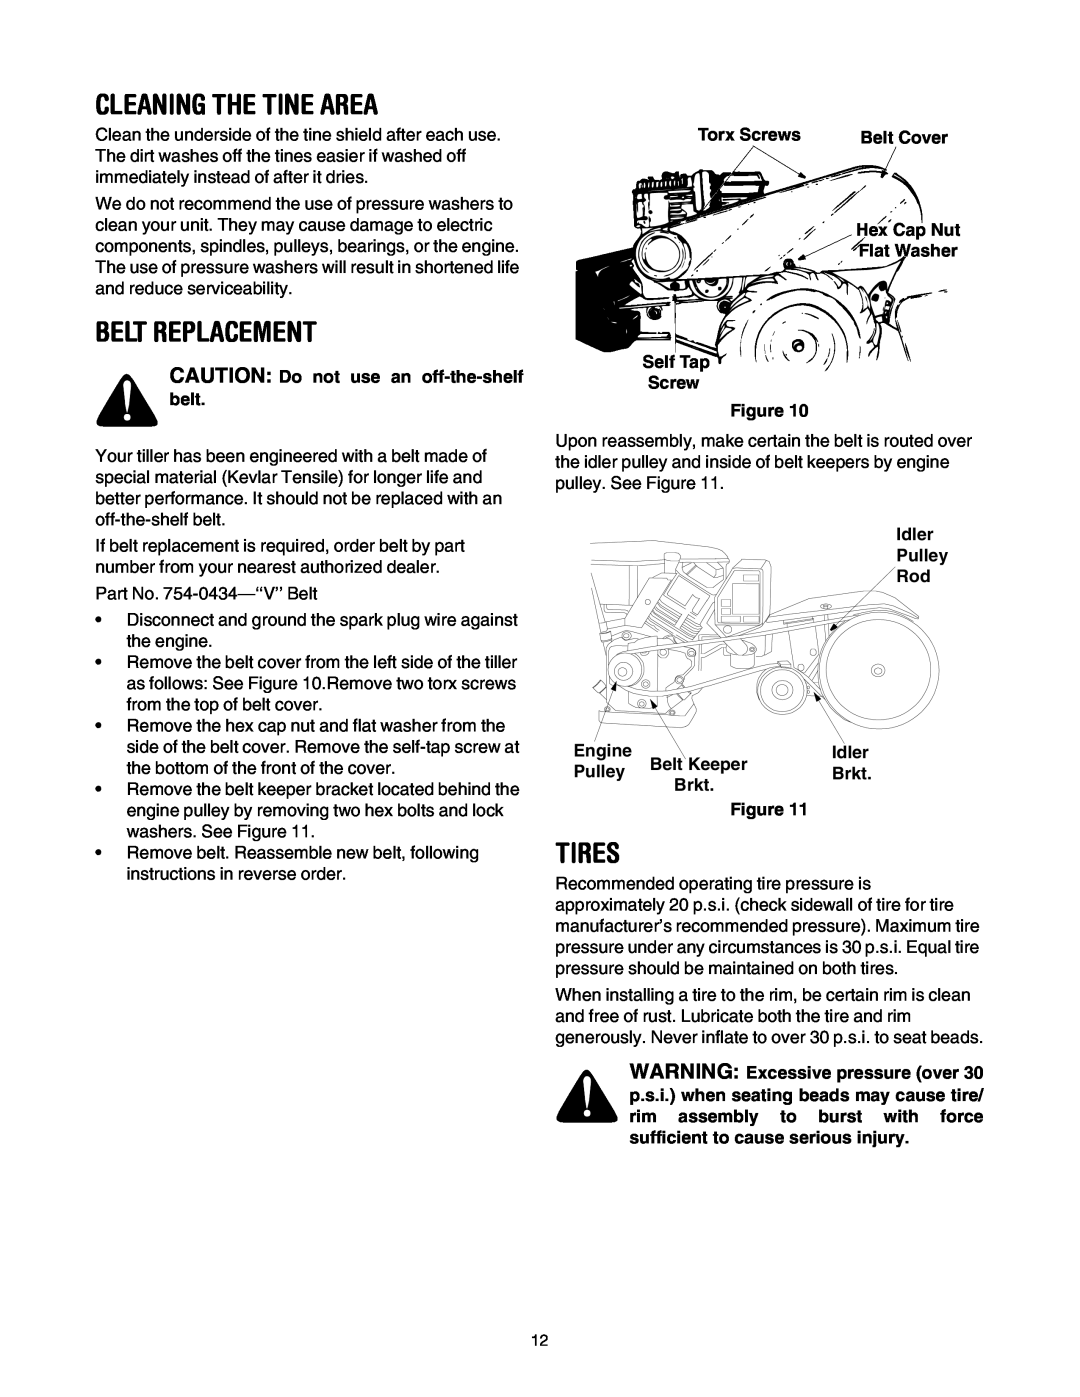 MTD 21A-450 Series manual Cleaning The Tine Area, Belt Replacement, Tires 